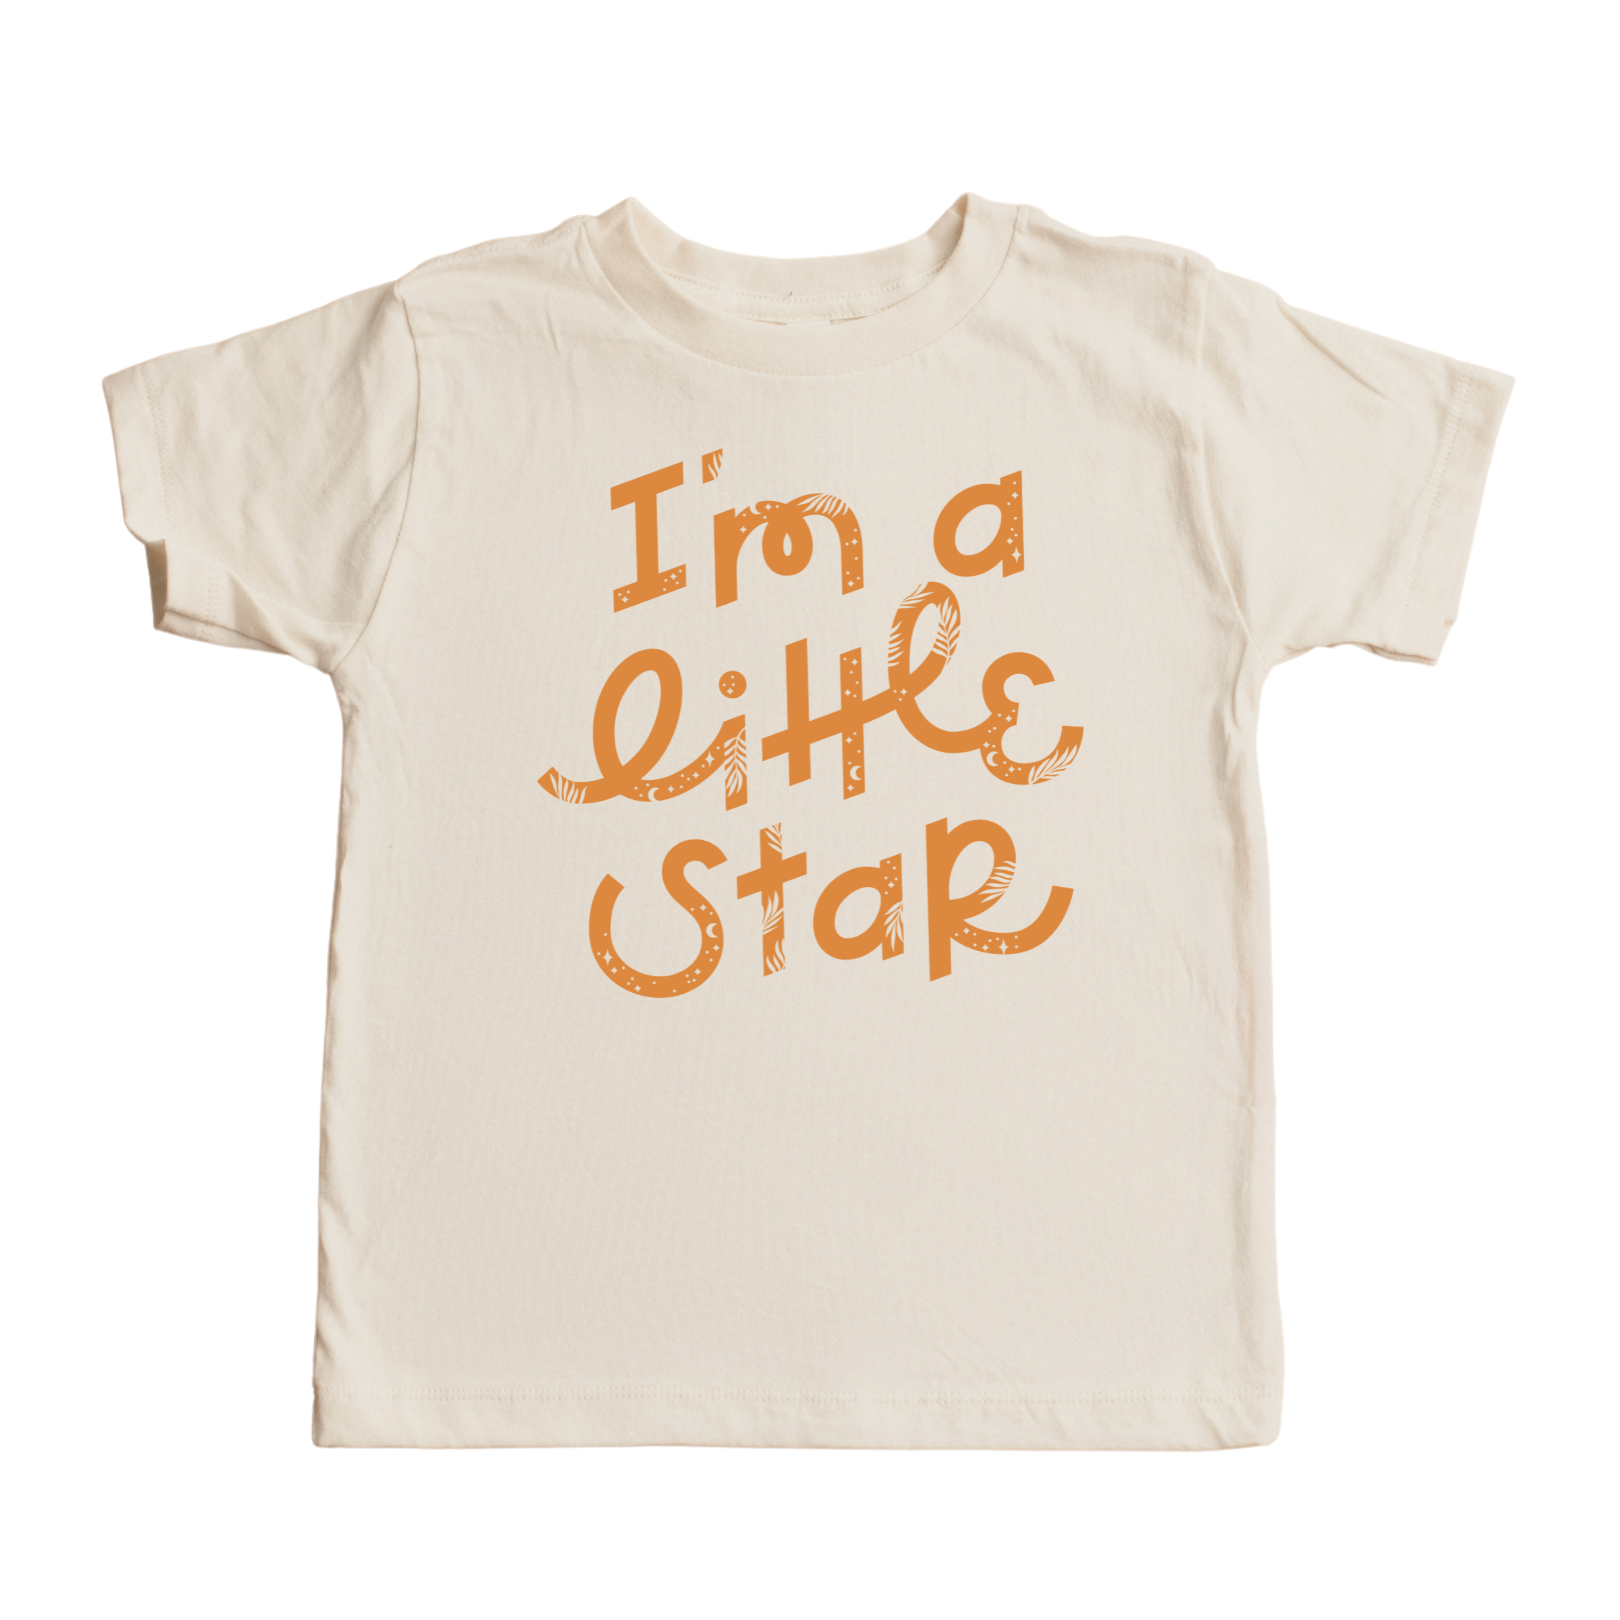 LITTLE STAR KEIKI TEE IN NATURAL